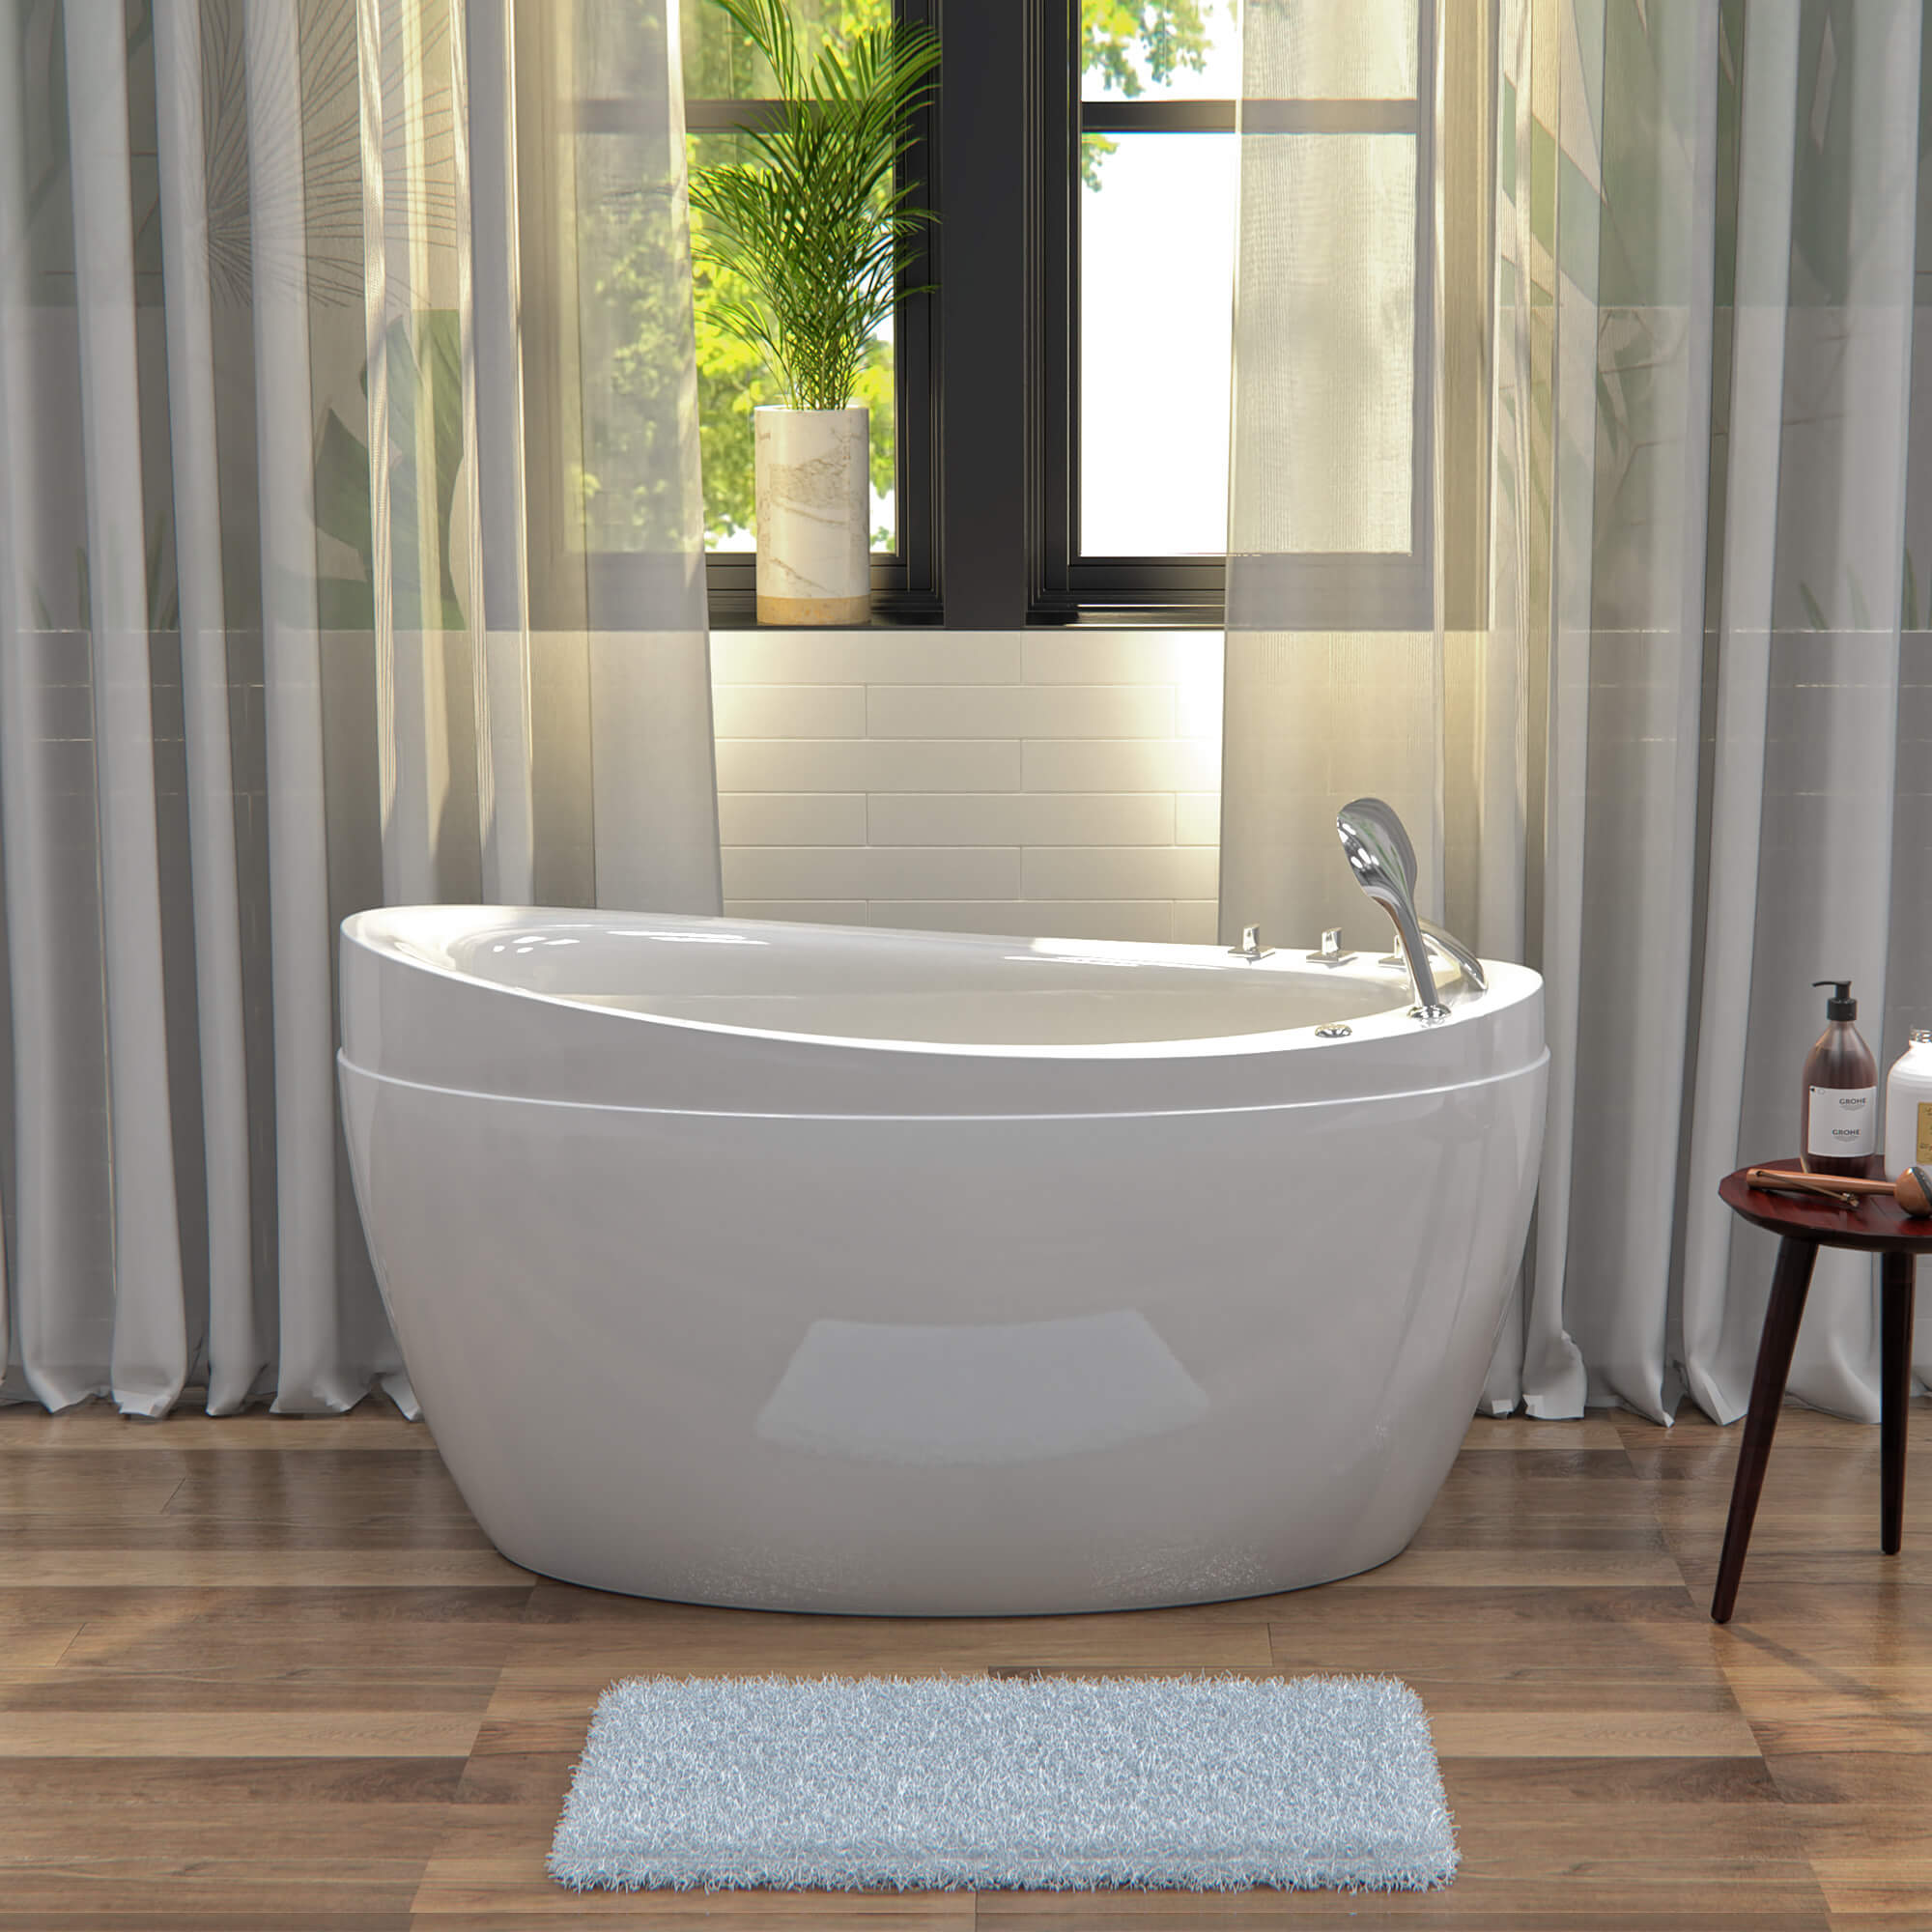 Empava-48JT011 luxury freestanding acrylic air jets mirco bubble hydrotherapy oval modern white SPA bathtub front view